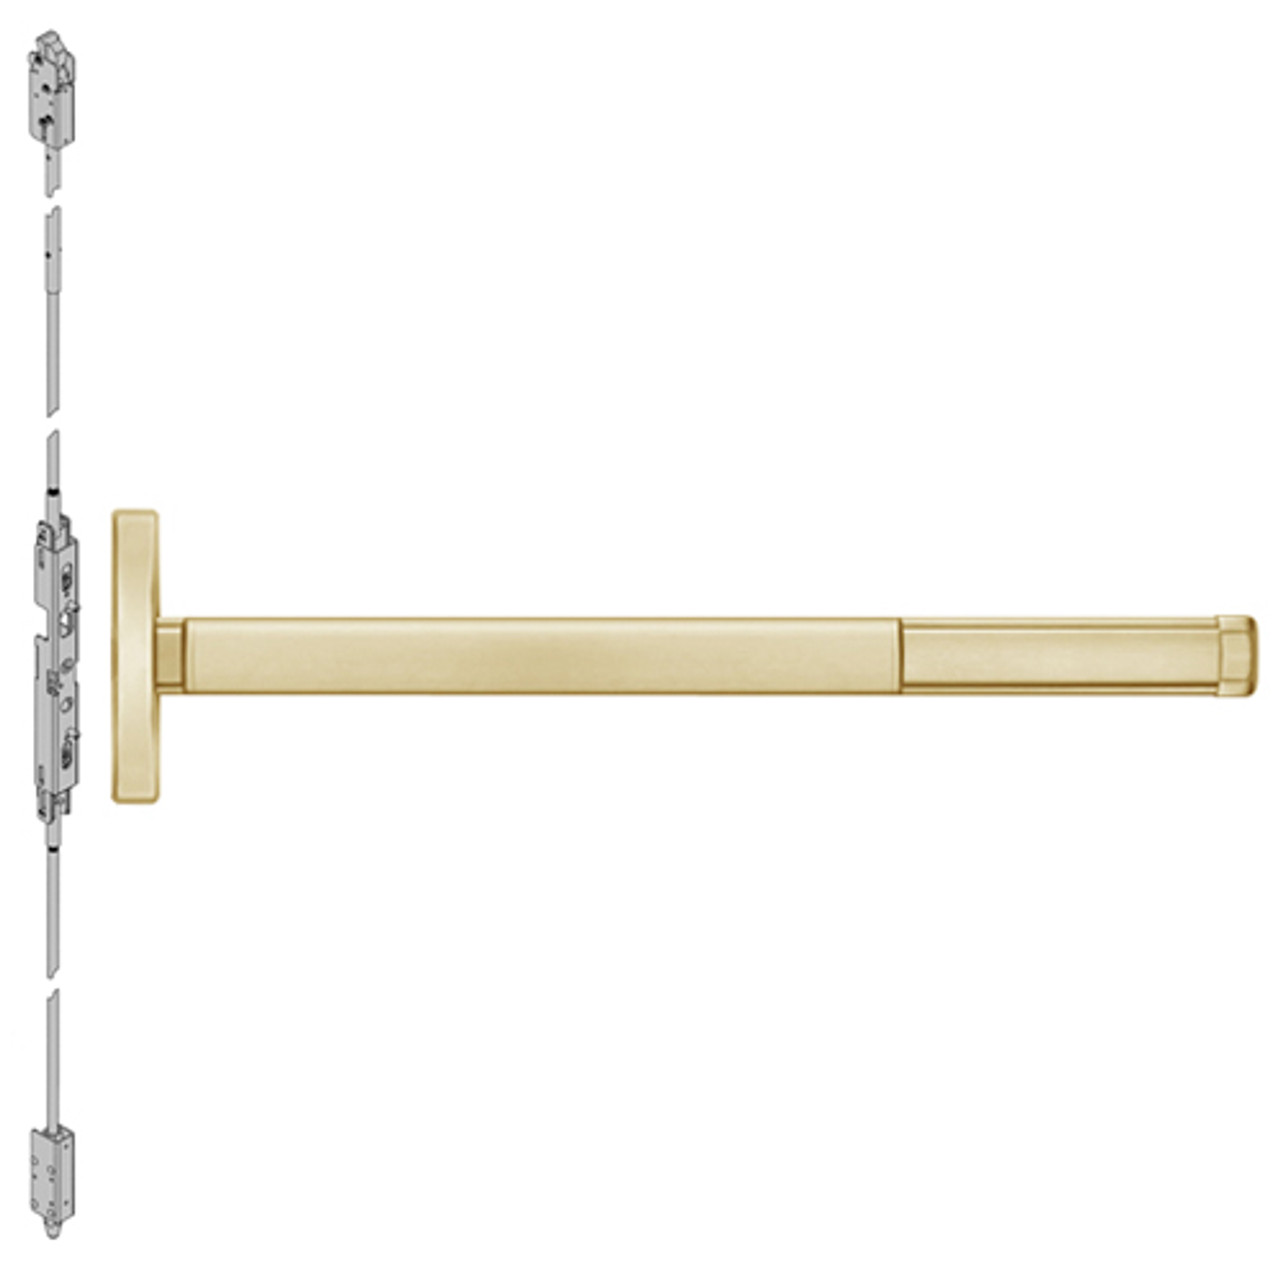 FL2603LBR-606-36 PHI 2600 Series Fire Rated Concealed Vertical Rod Exit Device Prepped for Key Retracts Latchbolt with Less Bottom Rod in Satin Brass Finish